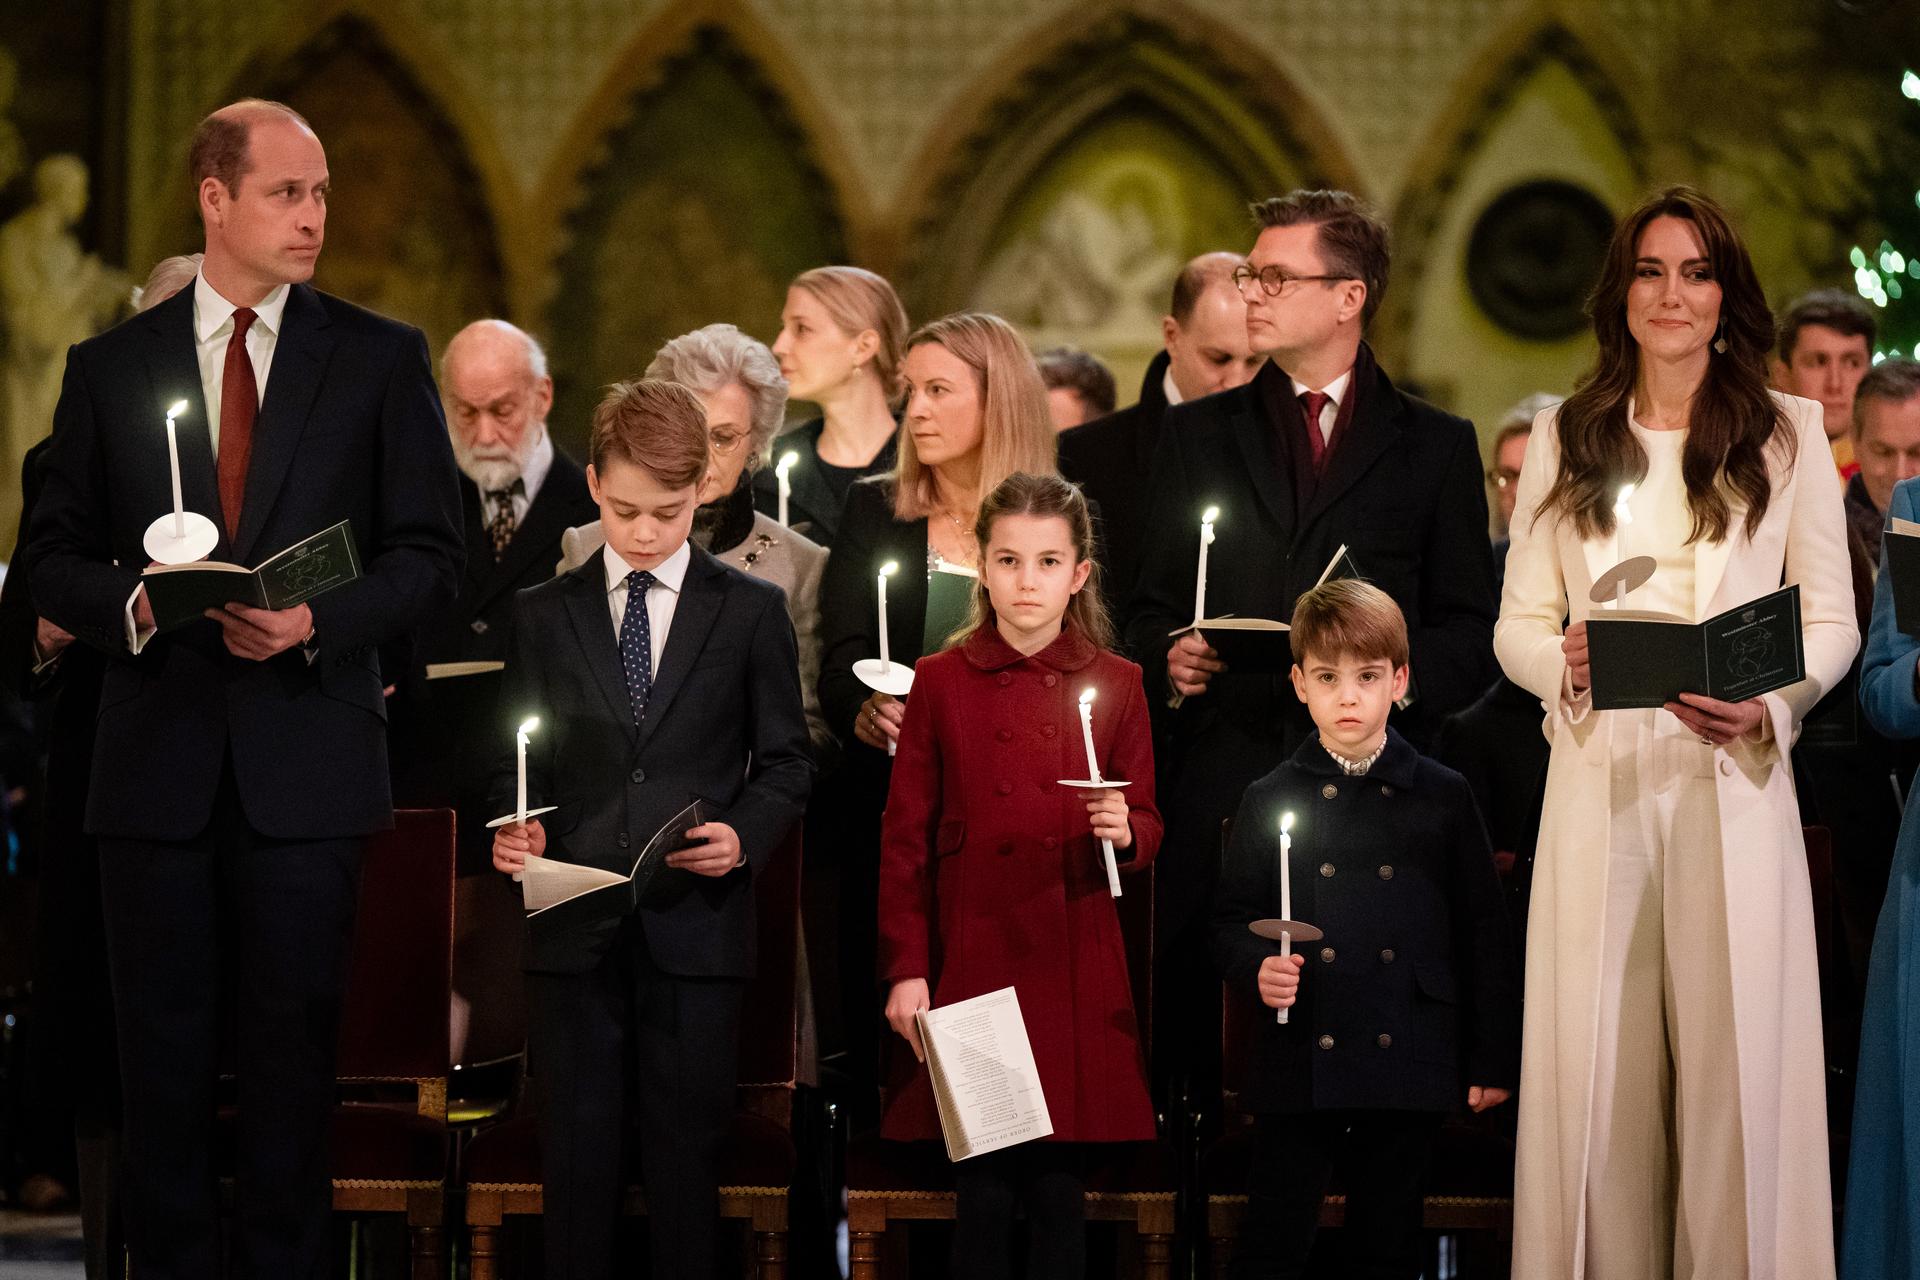 The Wales family during the Royal Carols: Together At Christmas service.